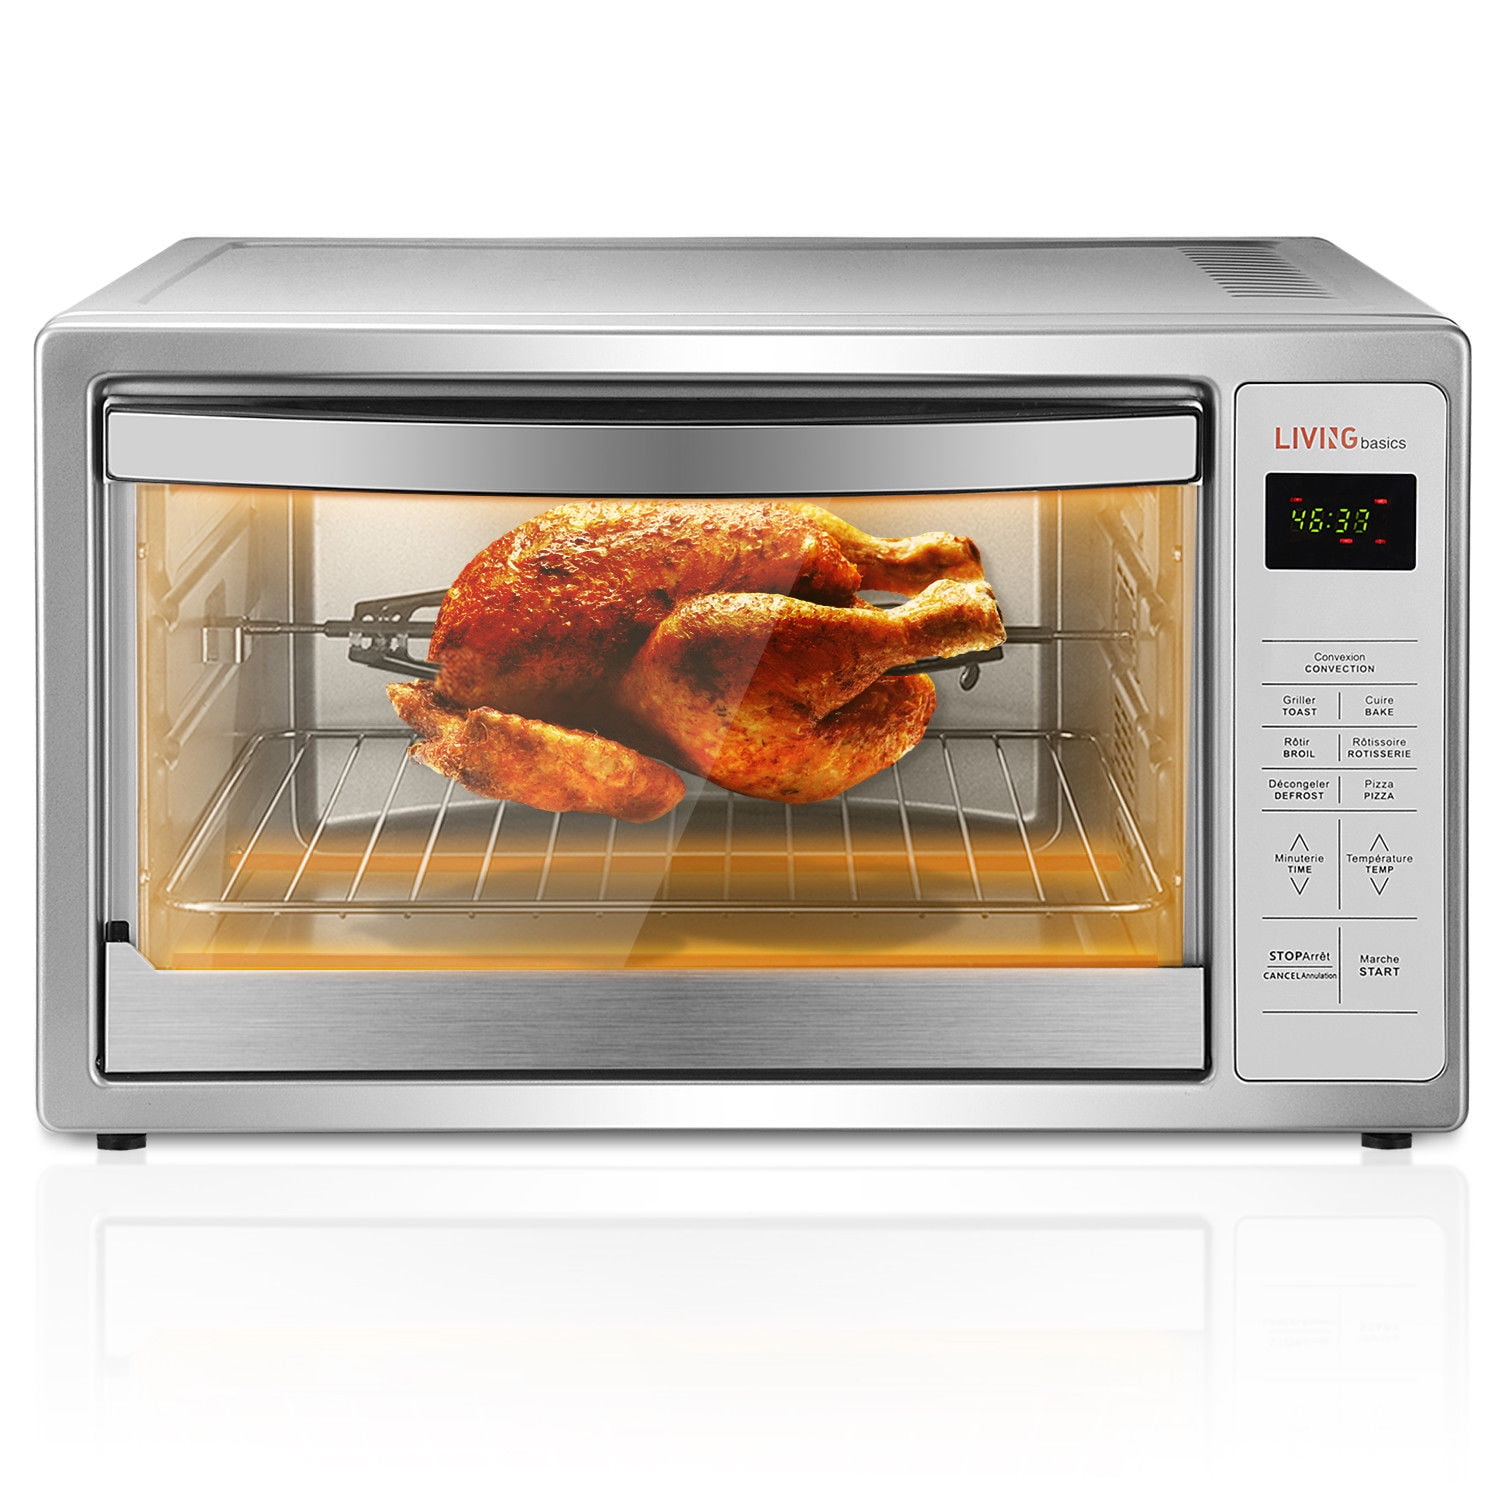 Liveditor Oven Convection Roast Chicken Pizza Bakeware Pan Set